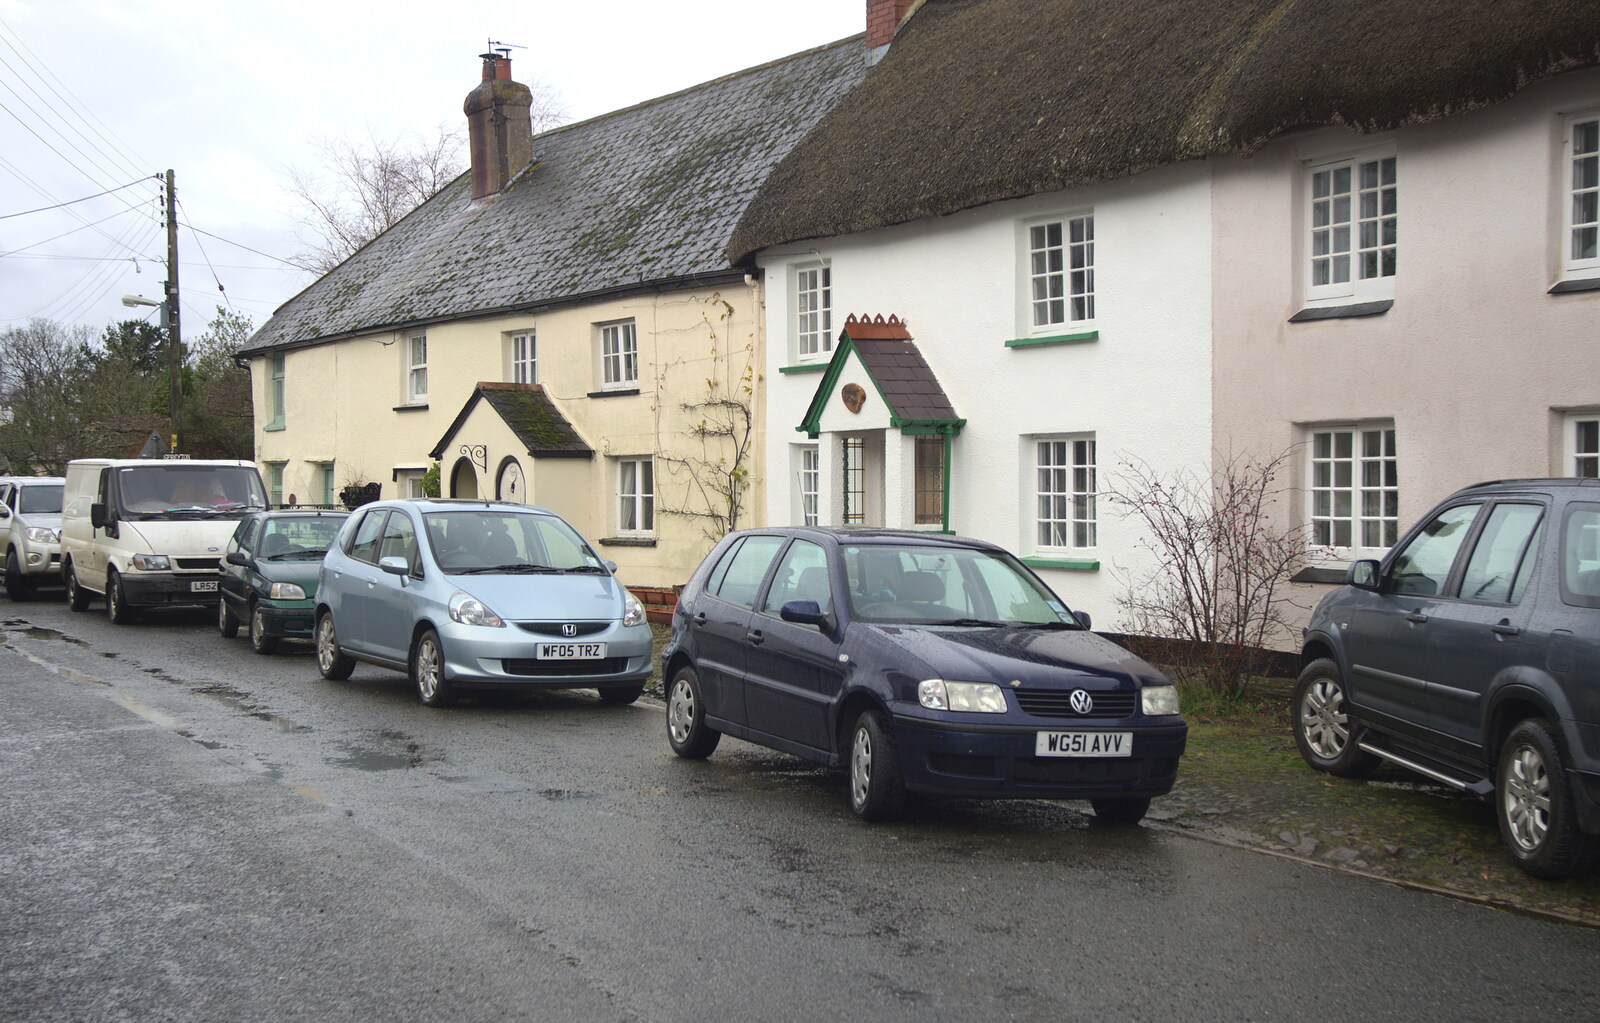 Spreyton cottages from The Boxing Day Hunt, Chagford, Devon - 26th December 2012